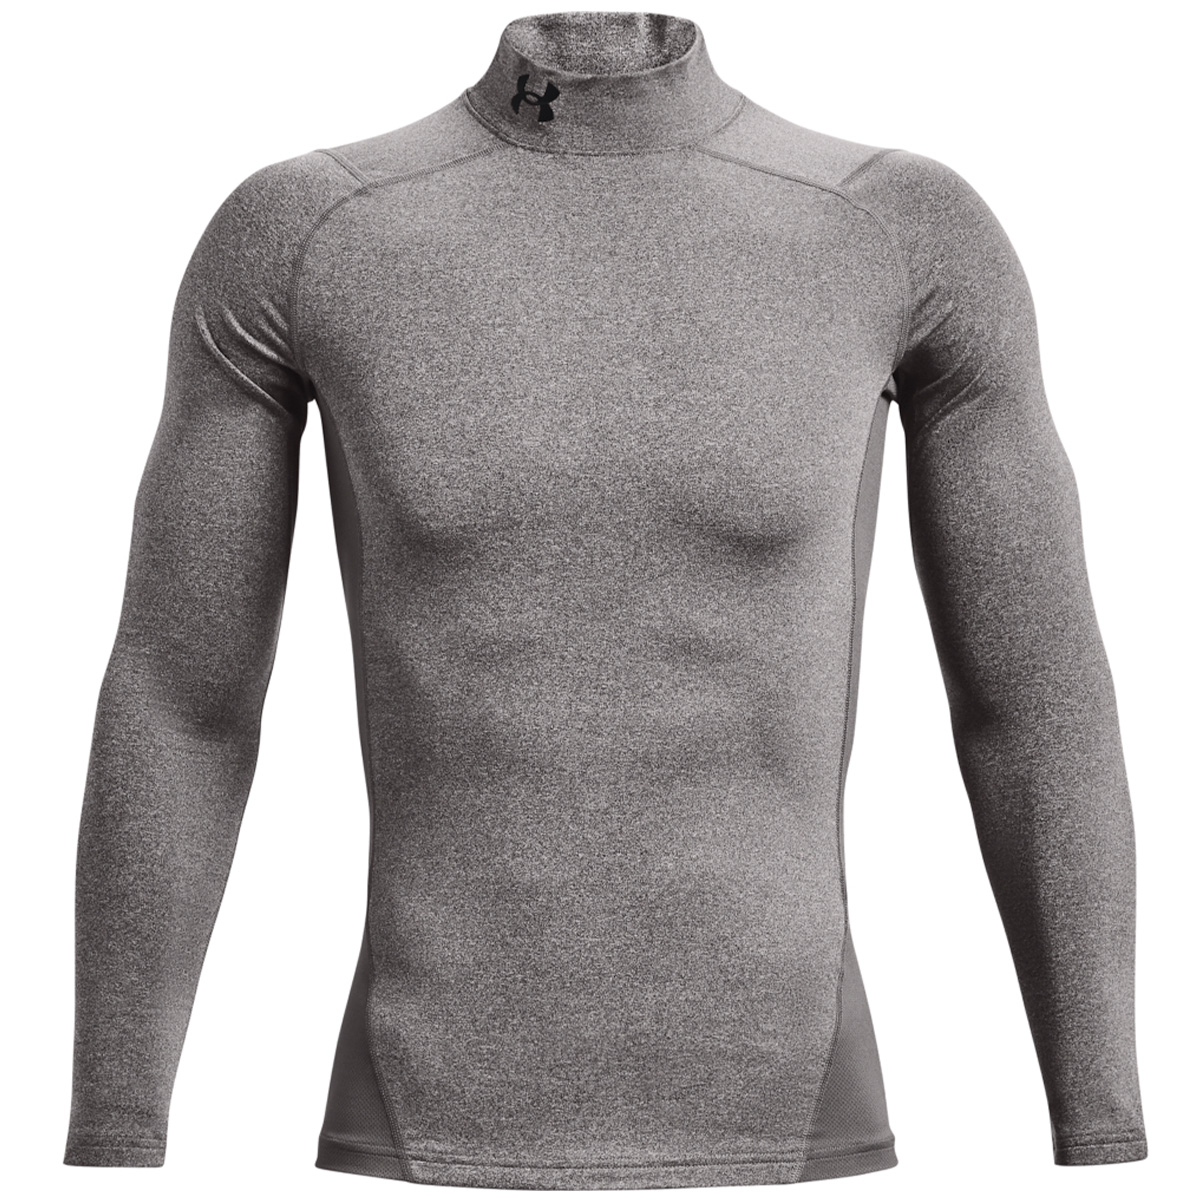 Image of Under Armour Coldgear Armour Compression Mock Base Layer